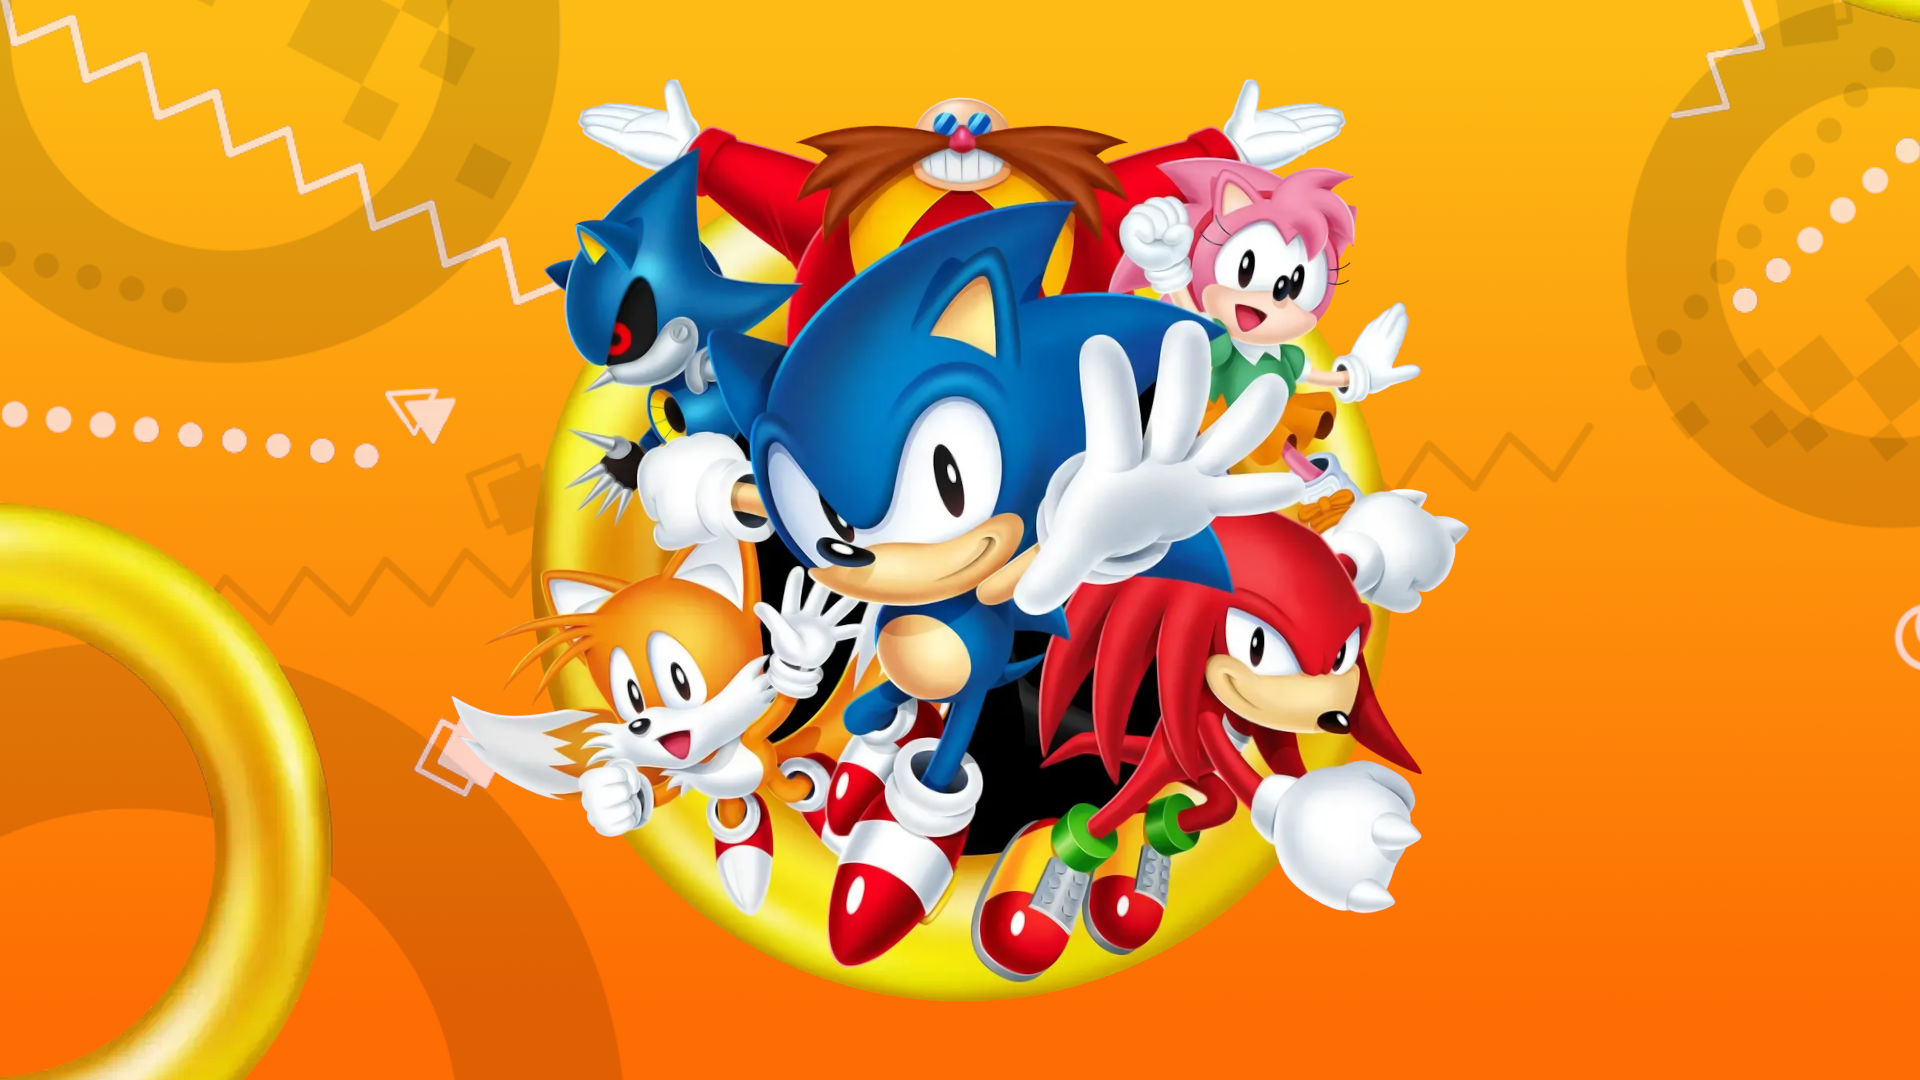 Sonic Sonic 2 Sonic 3 Sonic Origins Video Game Art Video Game Characters Tails Character Knuckles Eg 1920x1080